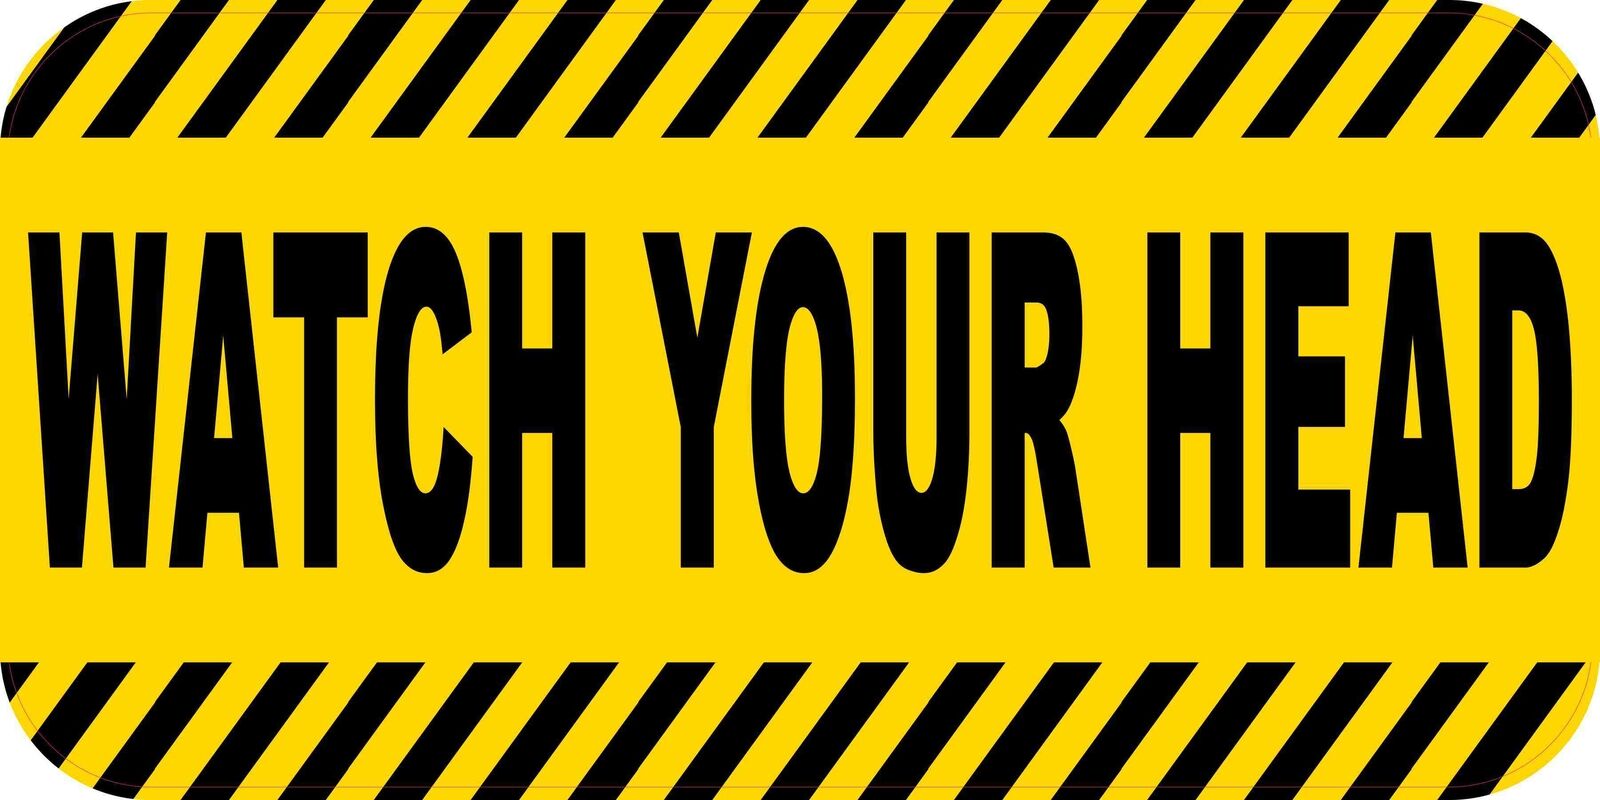 24 X 12 Watch Your Head Sticker Sign Decal Stickers Signs Decals Caution Signs